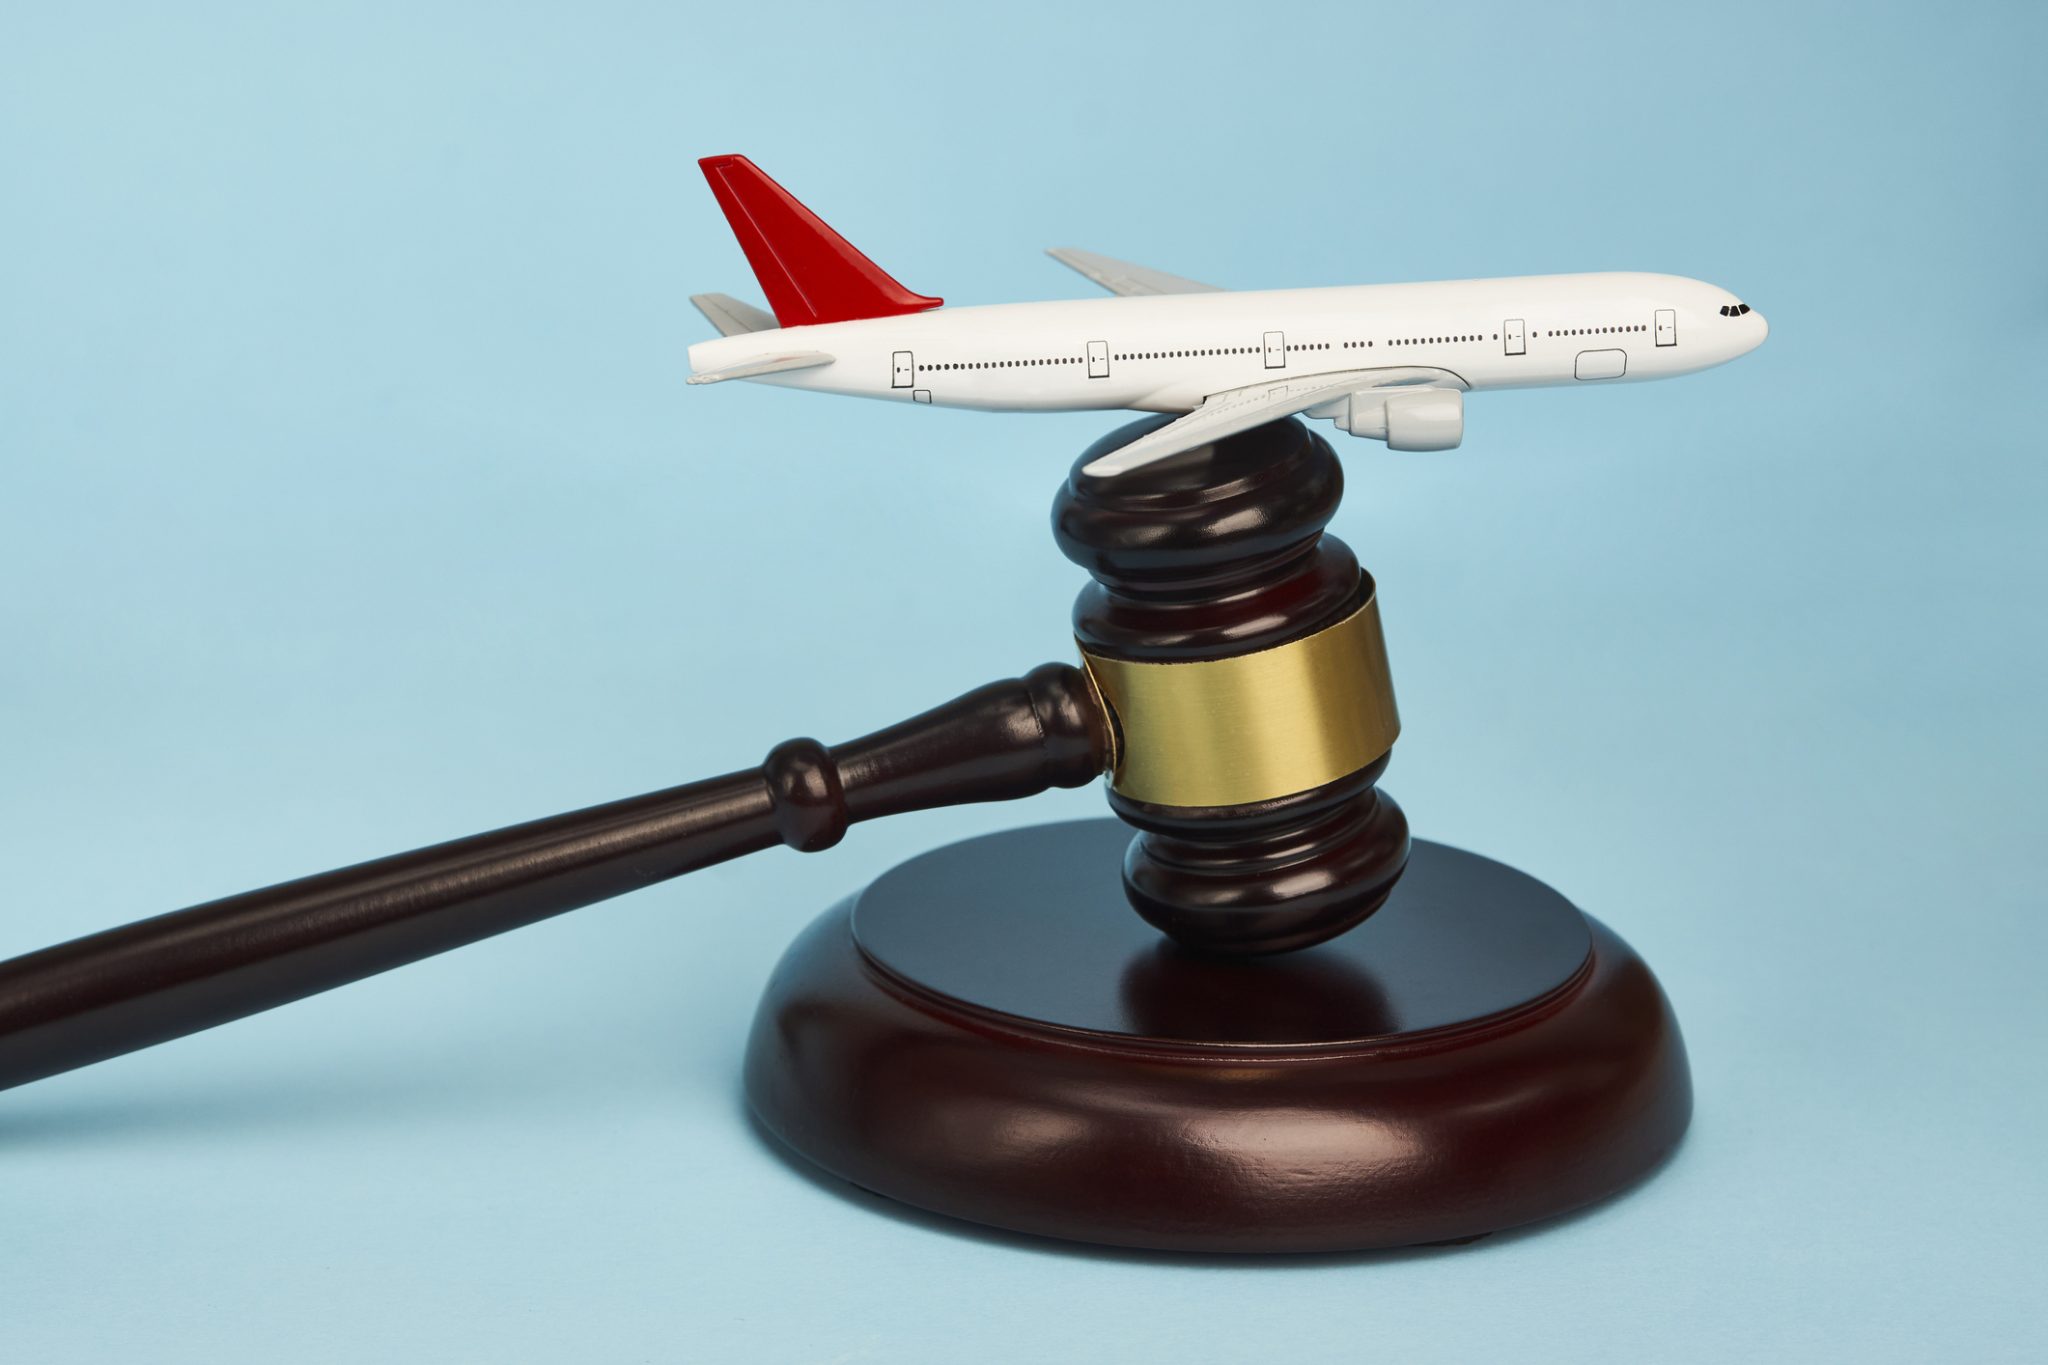 The FAA Reauthorization Act of 2023 What it is and Why it Matters